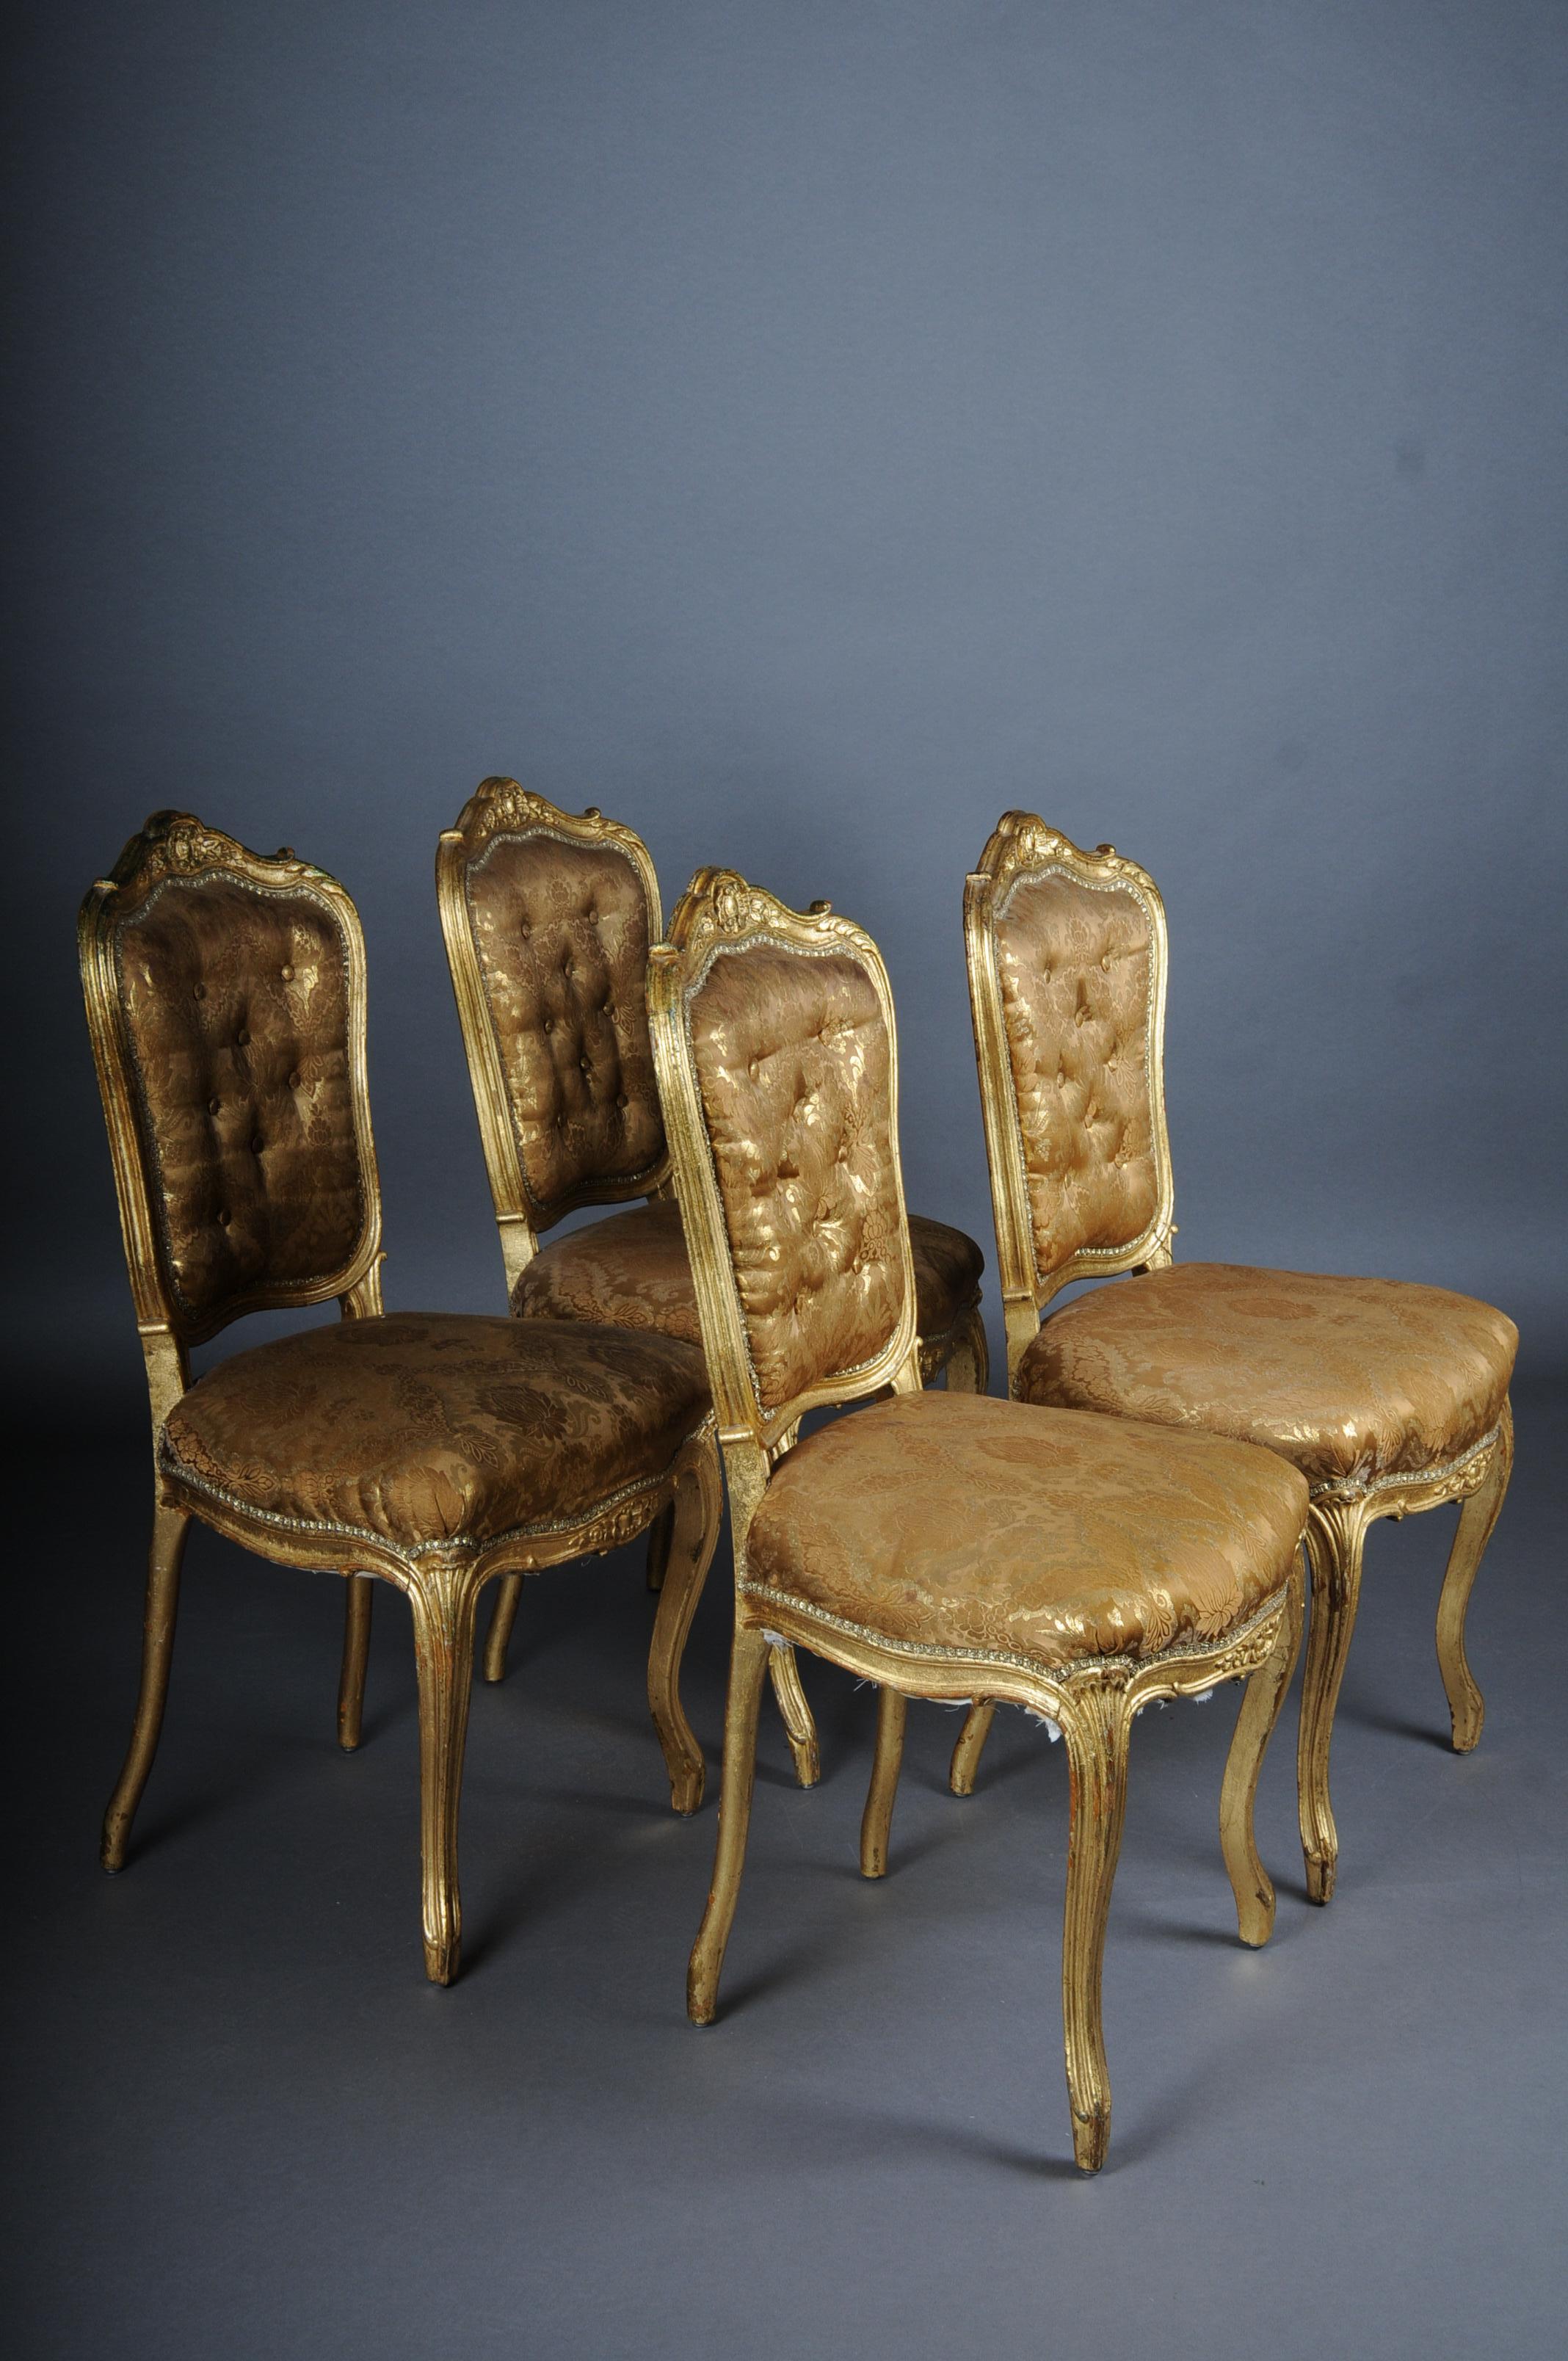 French salon chairs from the Bellevue Palace in Berlin, gold.

4 Exclusive French salon chairs from the Bellevue Palace in Berlin, the official residence of the Federal President of Germany.

These chairs date from the 1890s. Labeled and